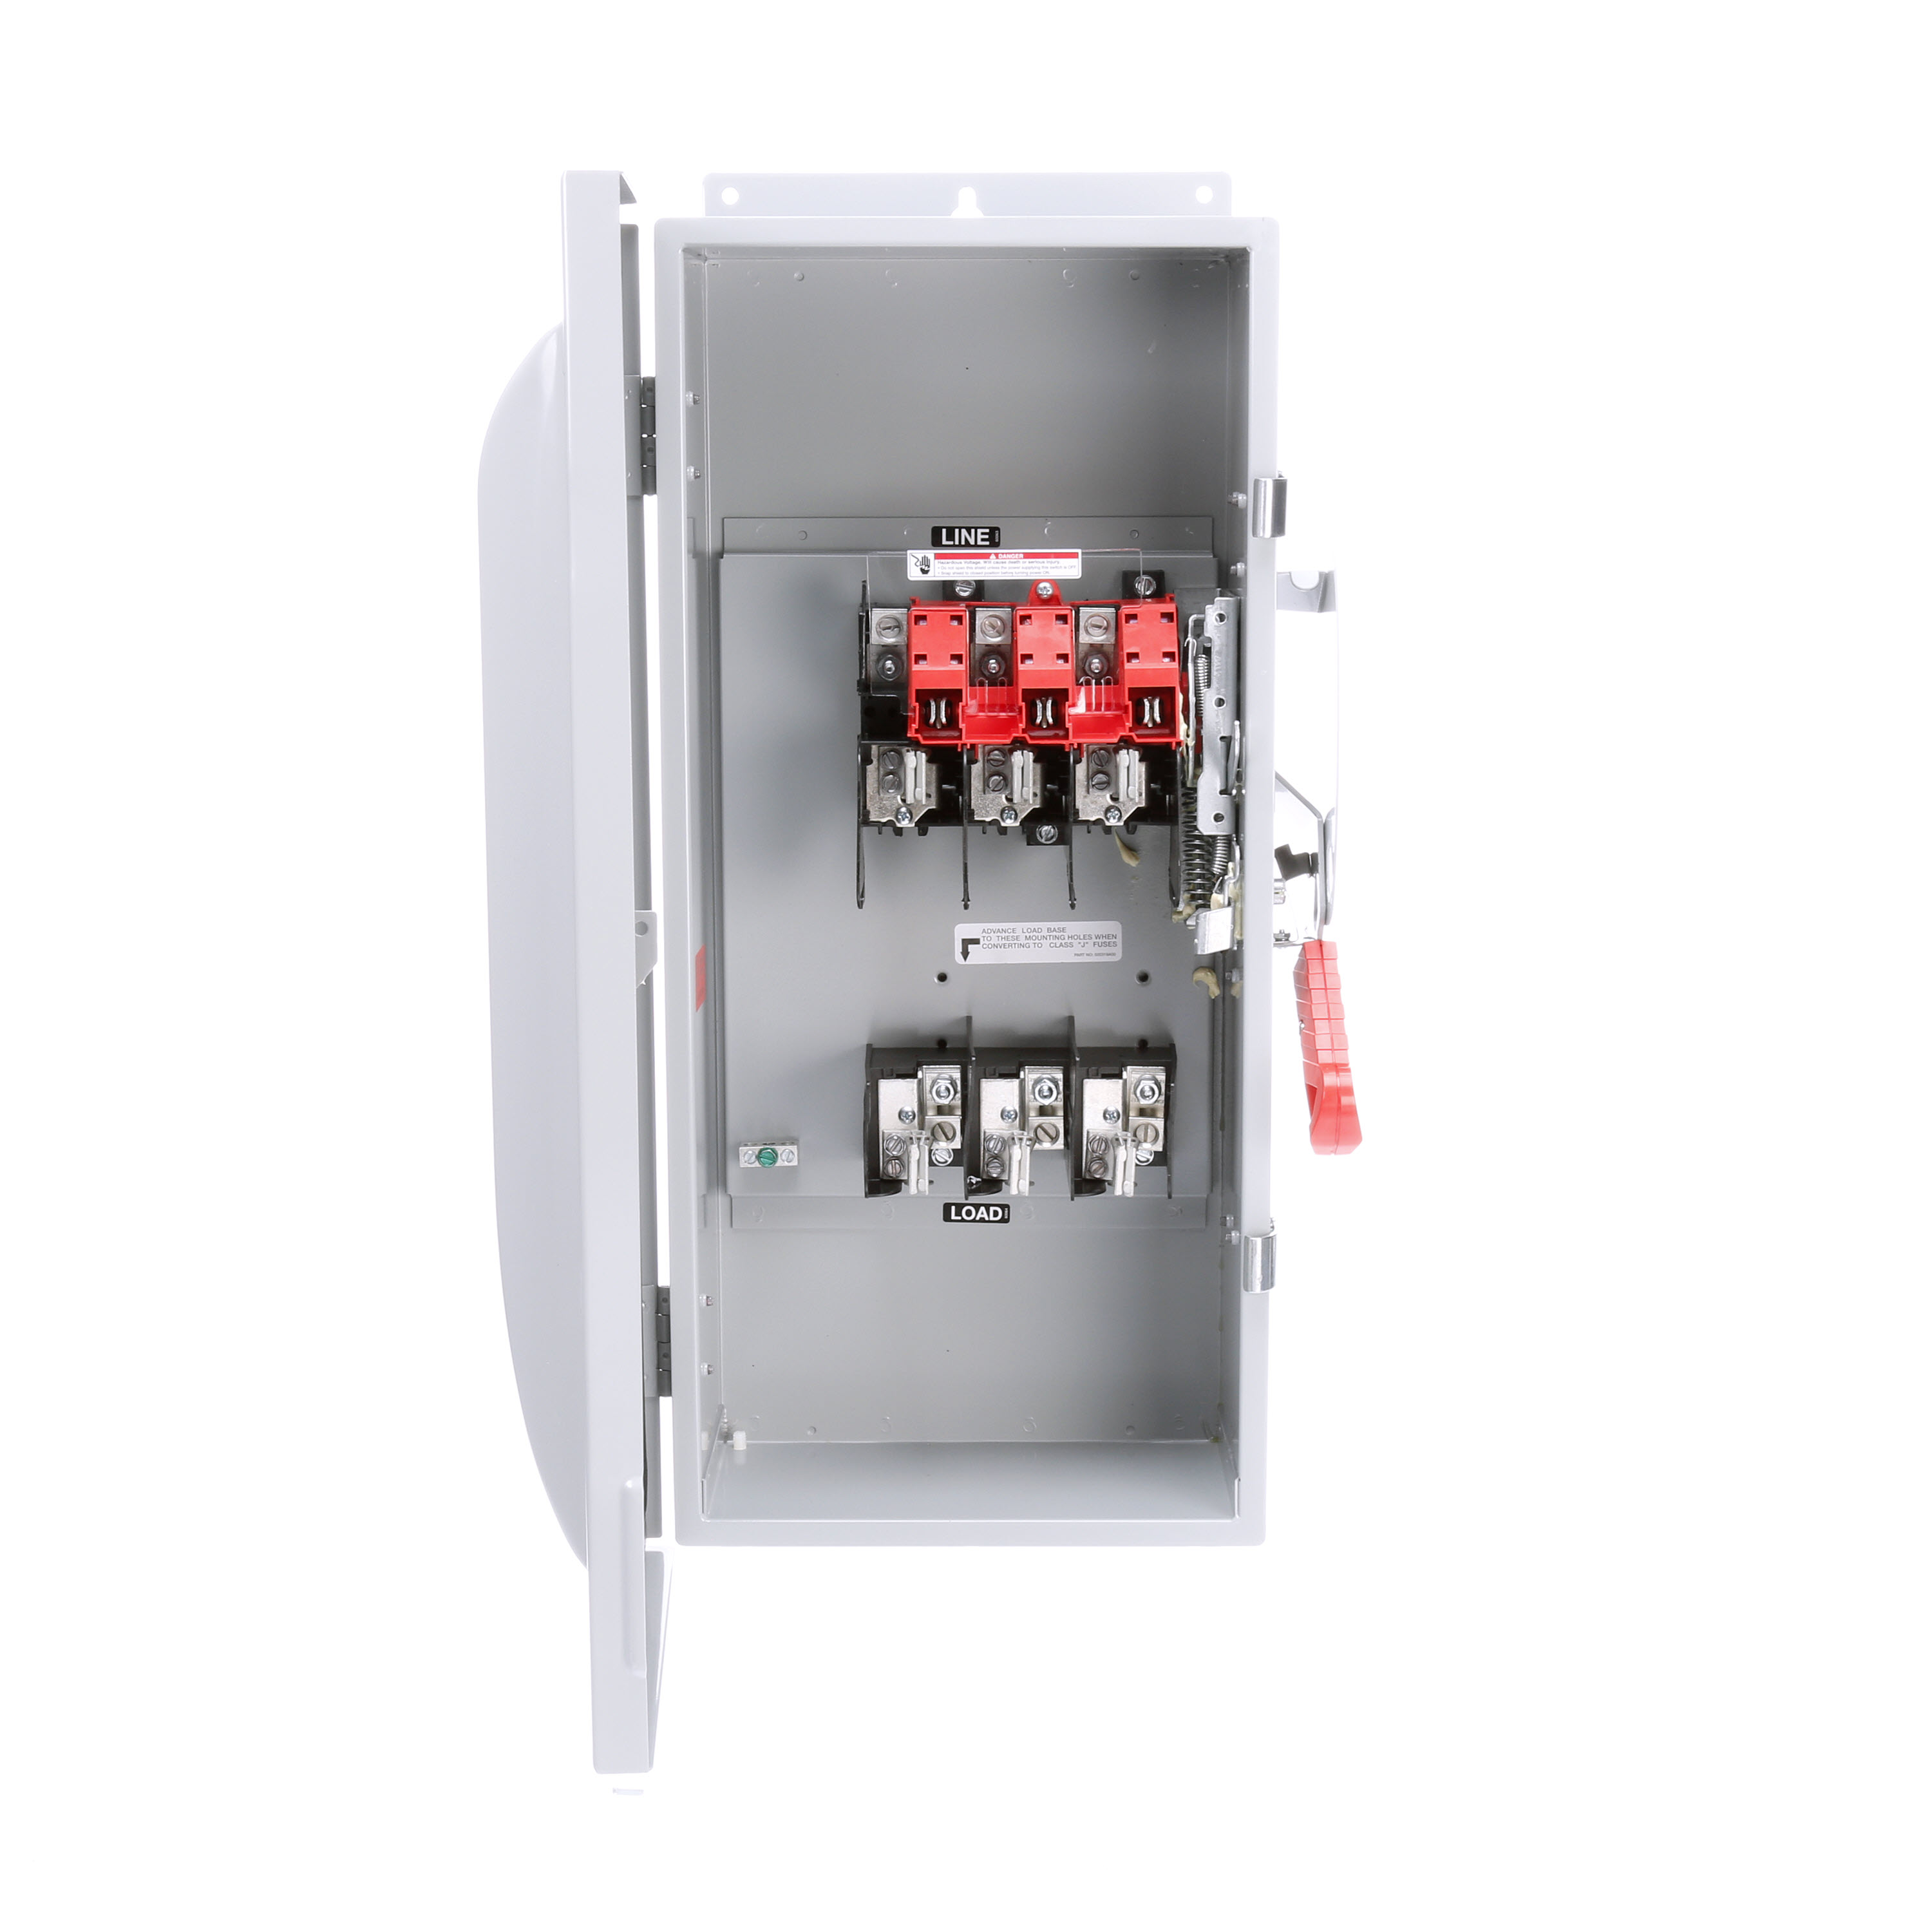 Siemens Low Voltage Circuit Protection Heavy Duty Safety Switch. 3-Pole 3-Fuse Fused in a type 12 industrial enclosure. Rated 600VAC (100A).